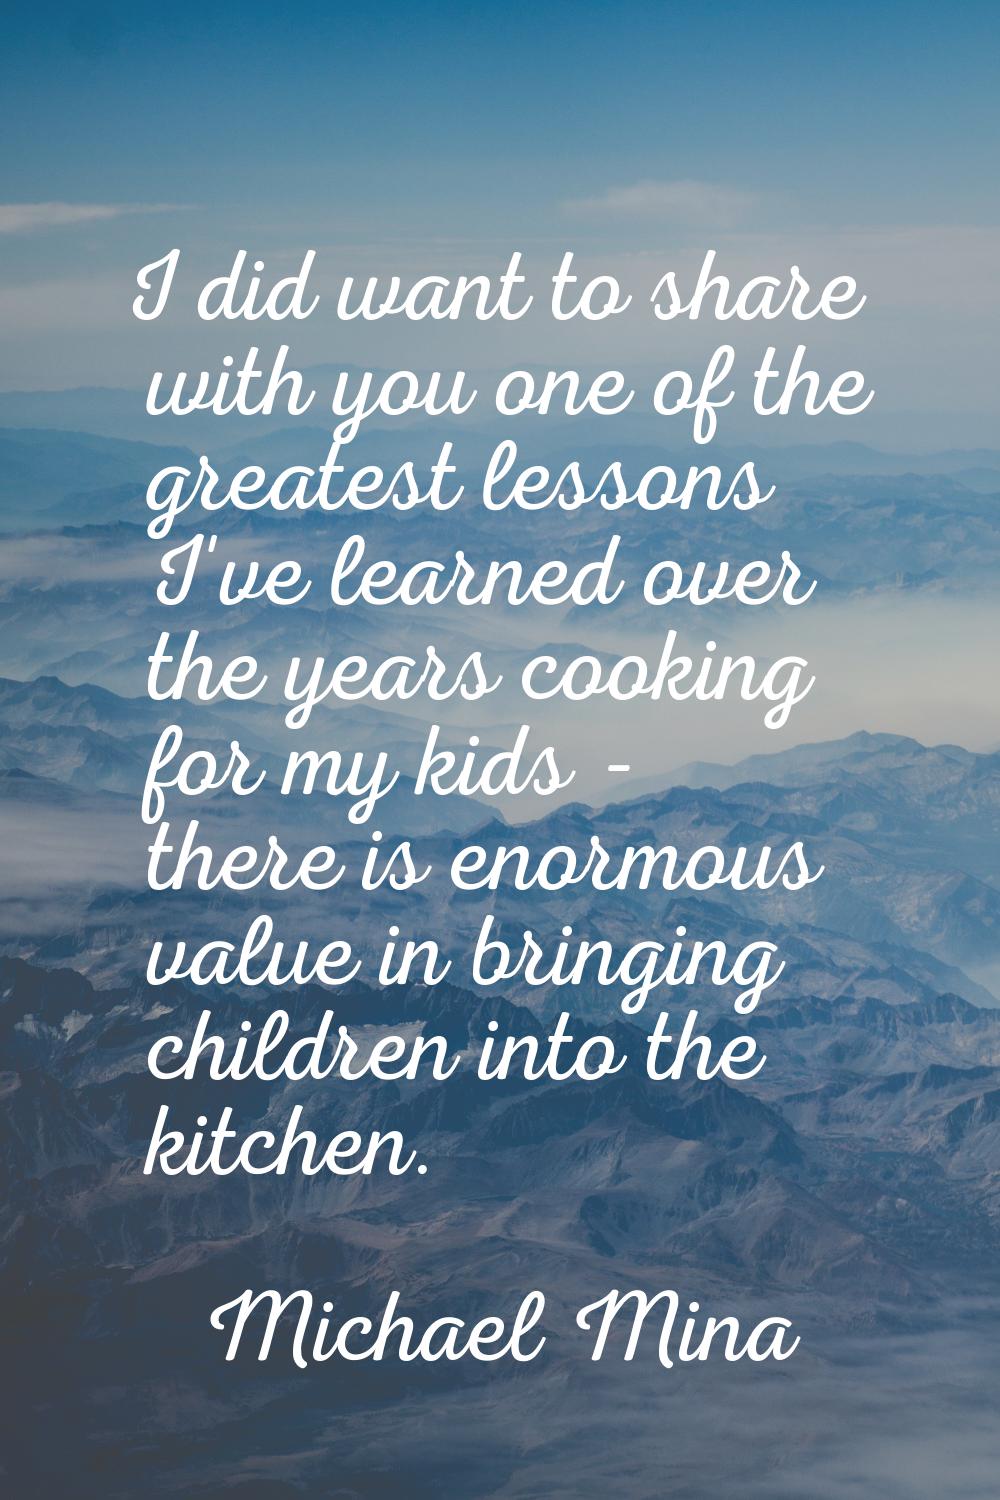 I did want to share with you one of the greatest lessons I've learned over the years cooking for my